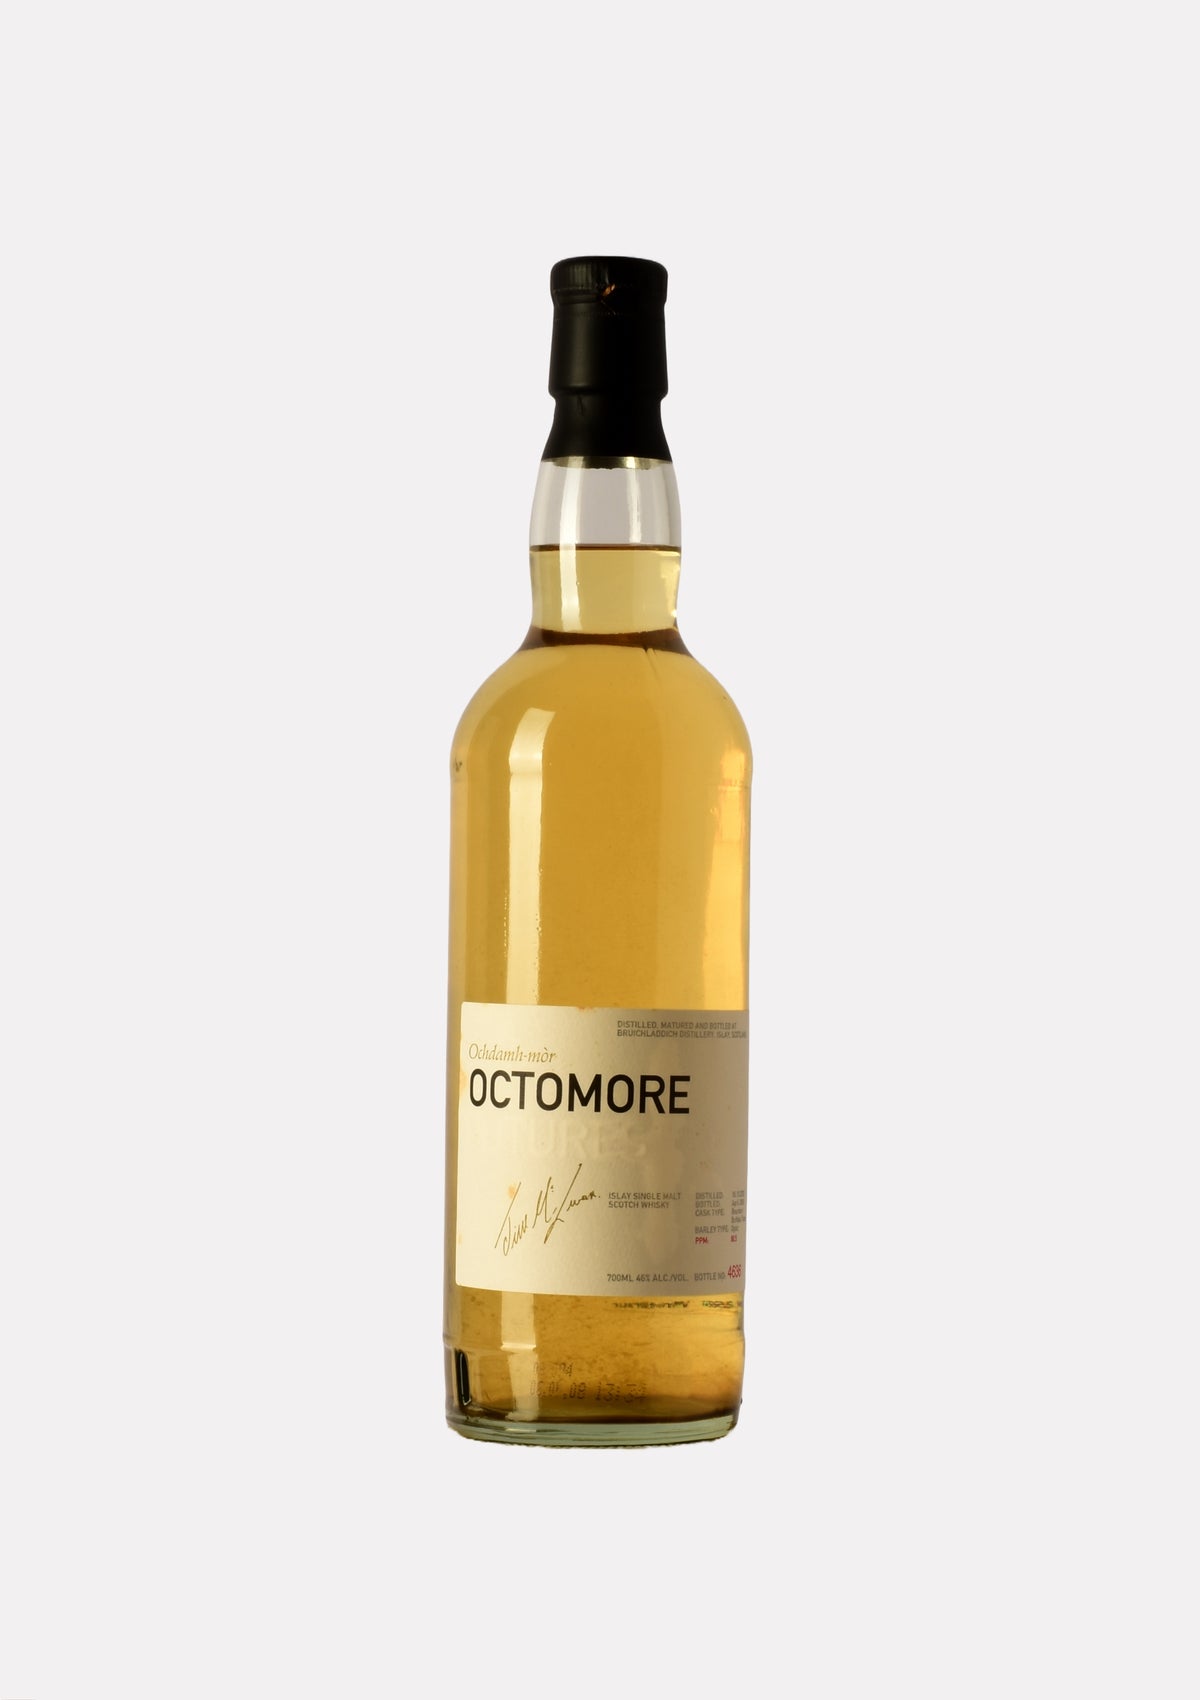 Octomore Futures 80.5 ppm